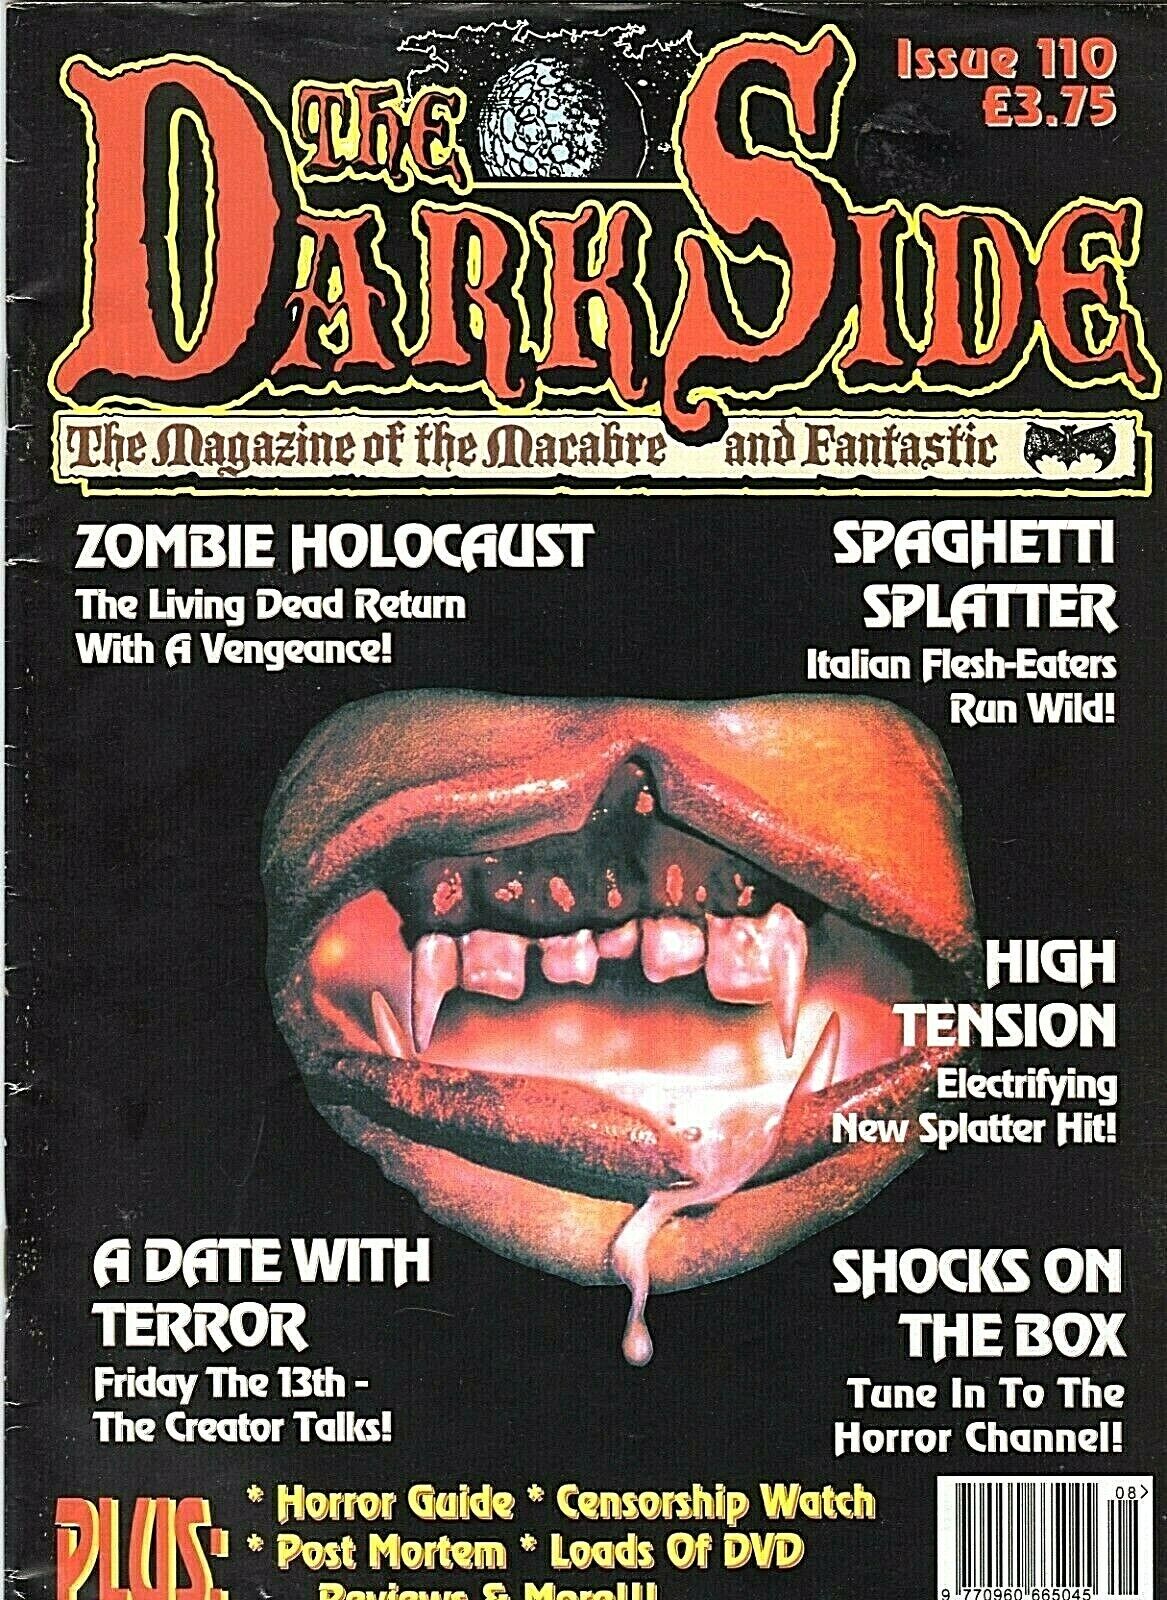 HORROR/MICABRE MAGAZINES 1991-2015 DARK SIDE/SHIVERS/FANDOM++ WITH DISCOUNTS